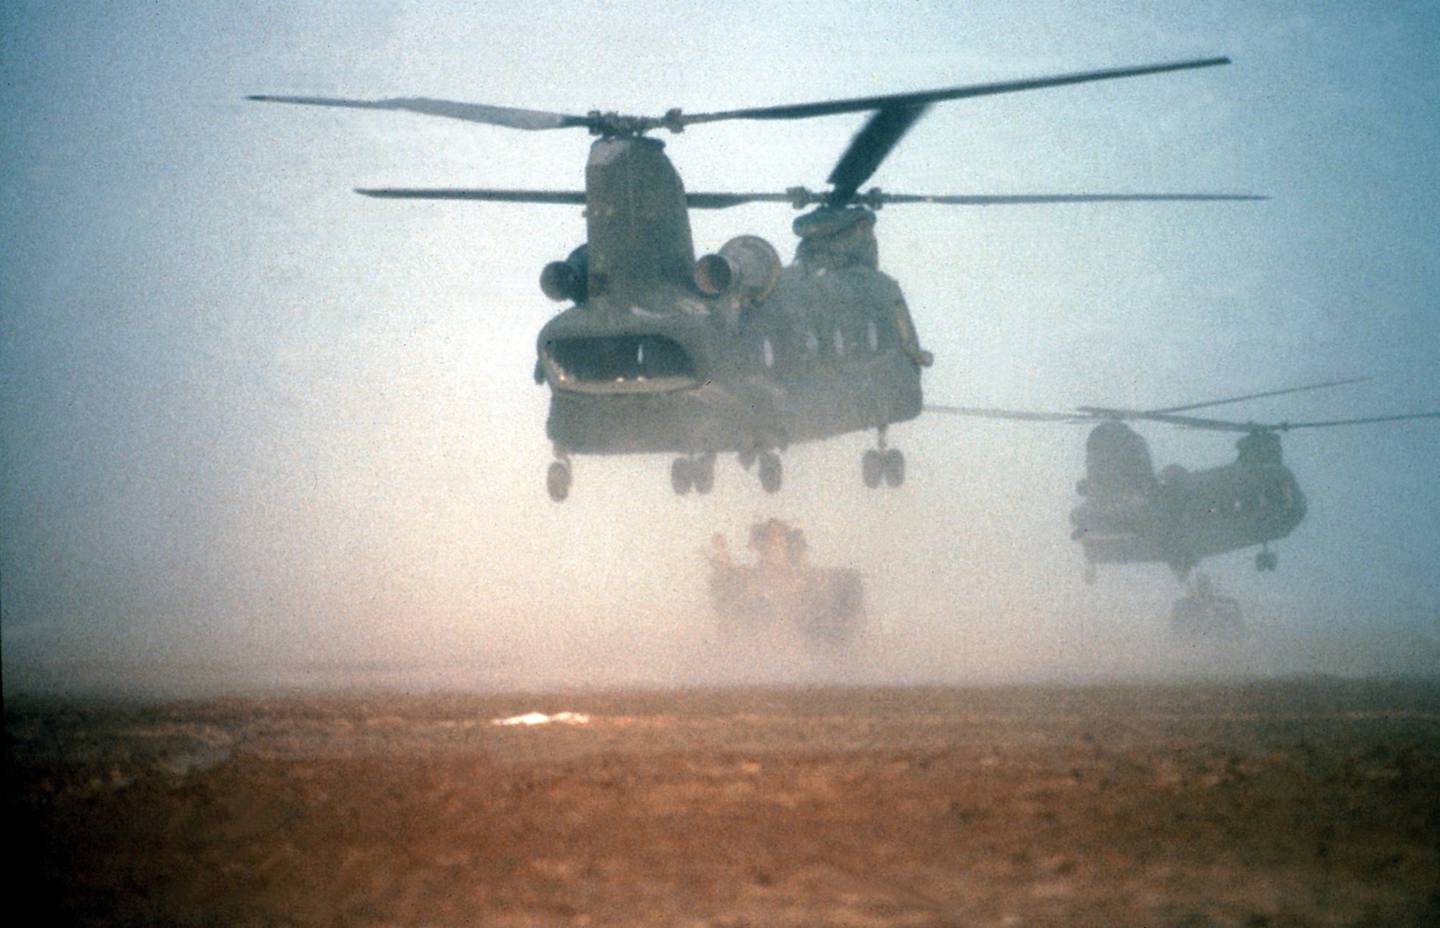 CH-47 Chinook helicopters similar to those flown by U.S. Army Captain Victoria Calhoun during Operations Desert Storm and Desert Shield.